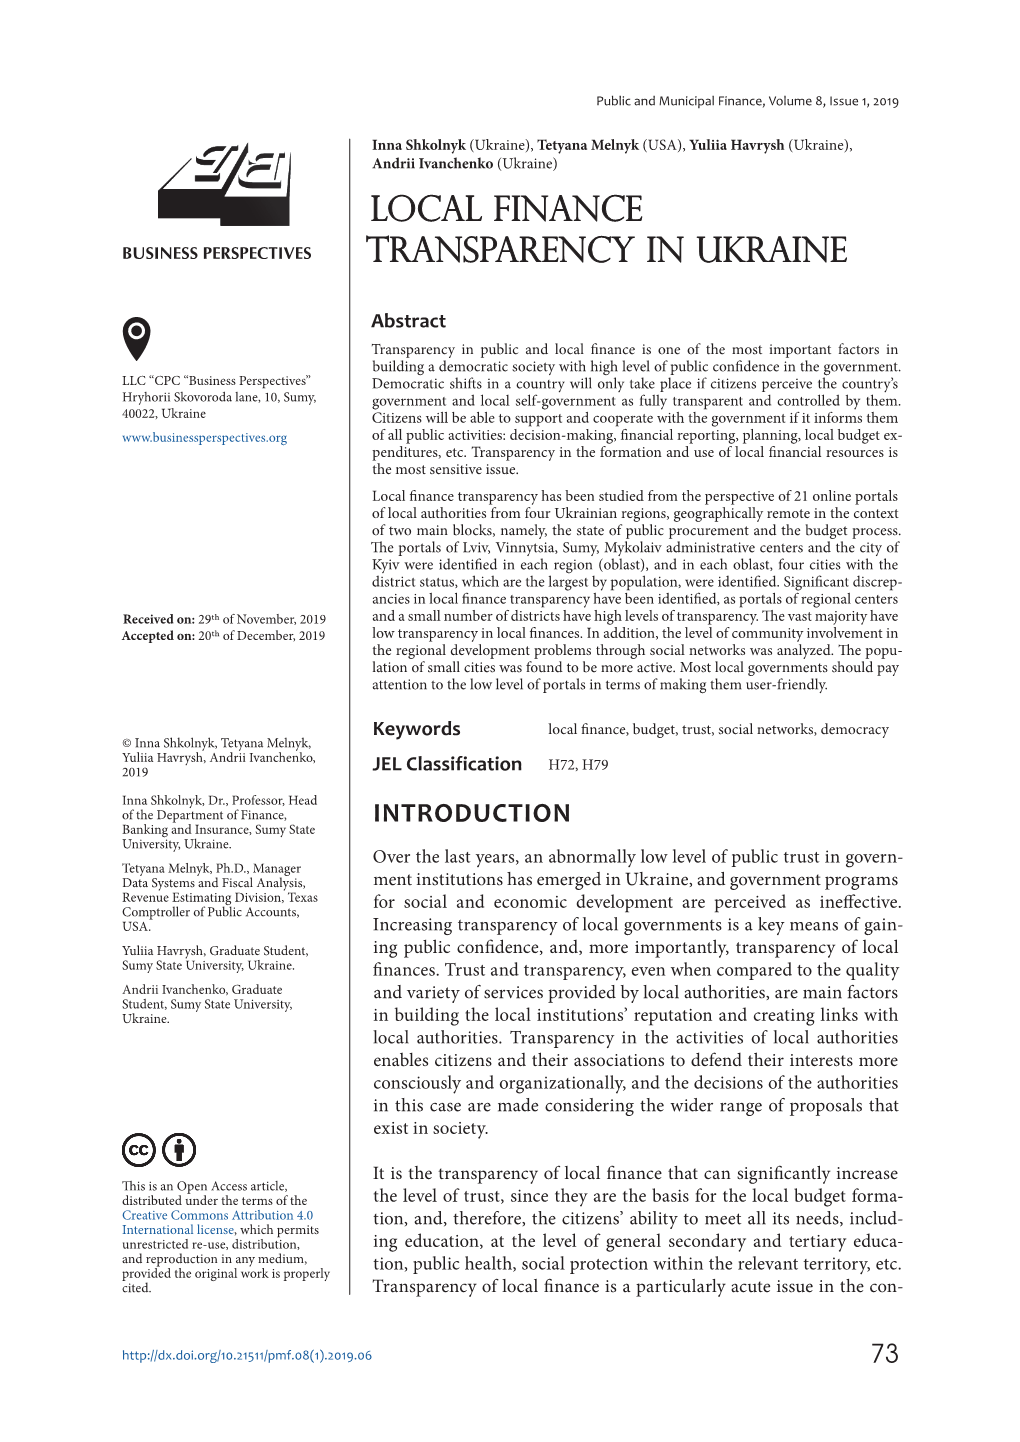 Local Finance Transparency in Ukraine and Their Popularity Among Communities